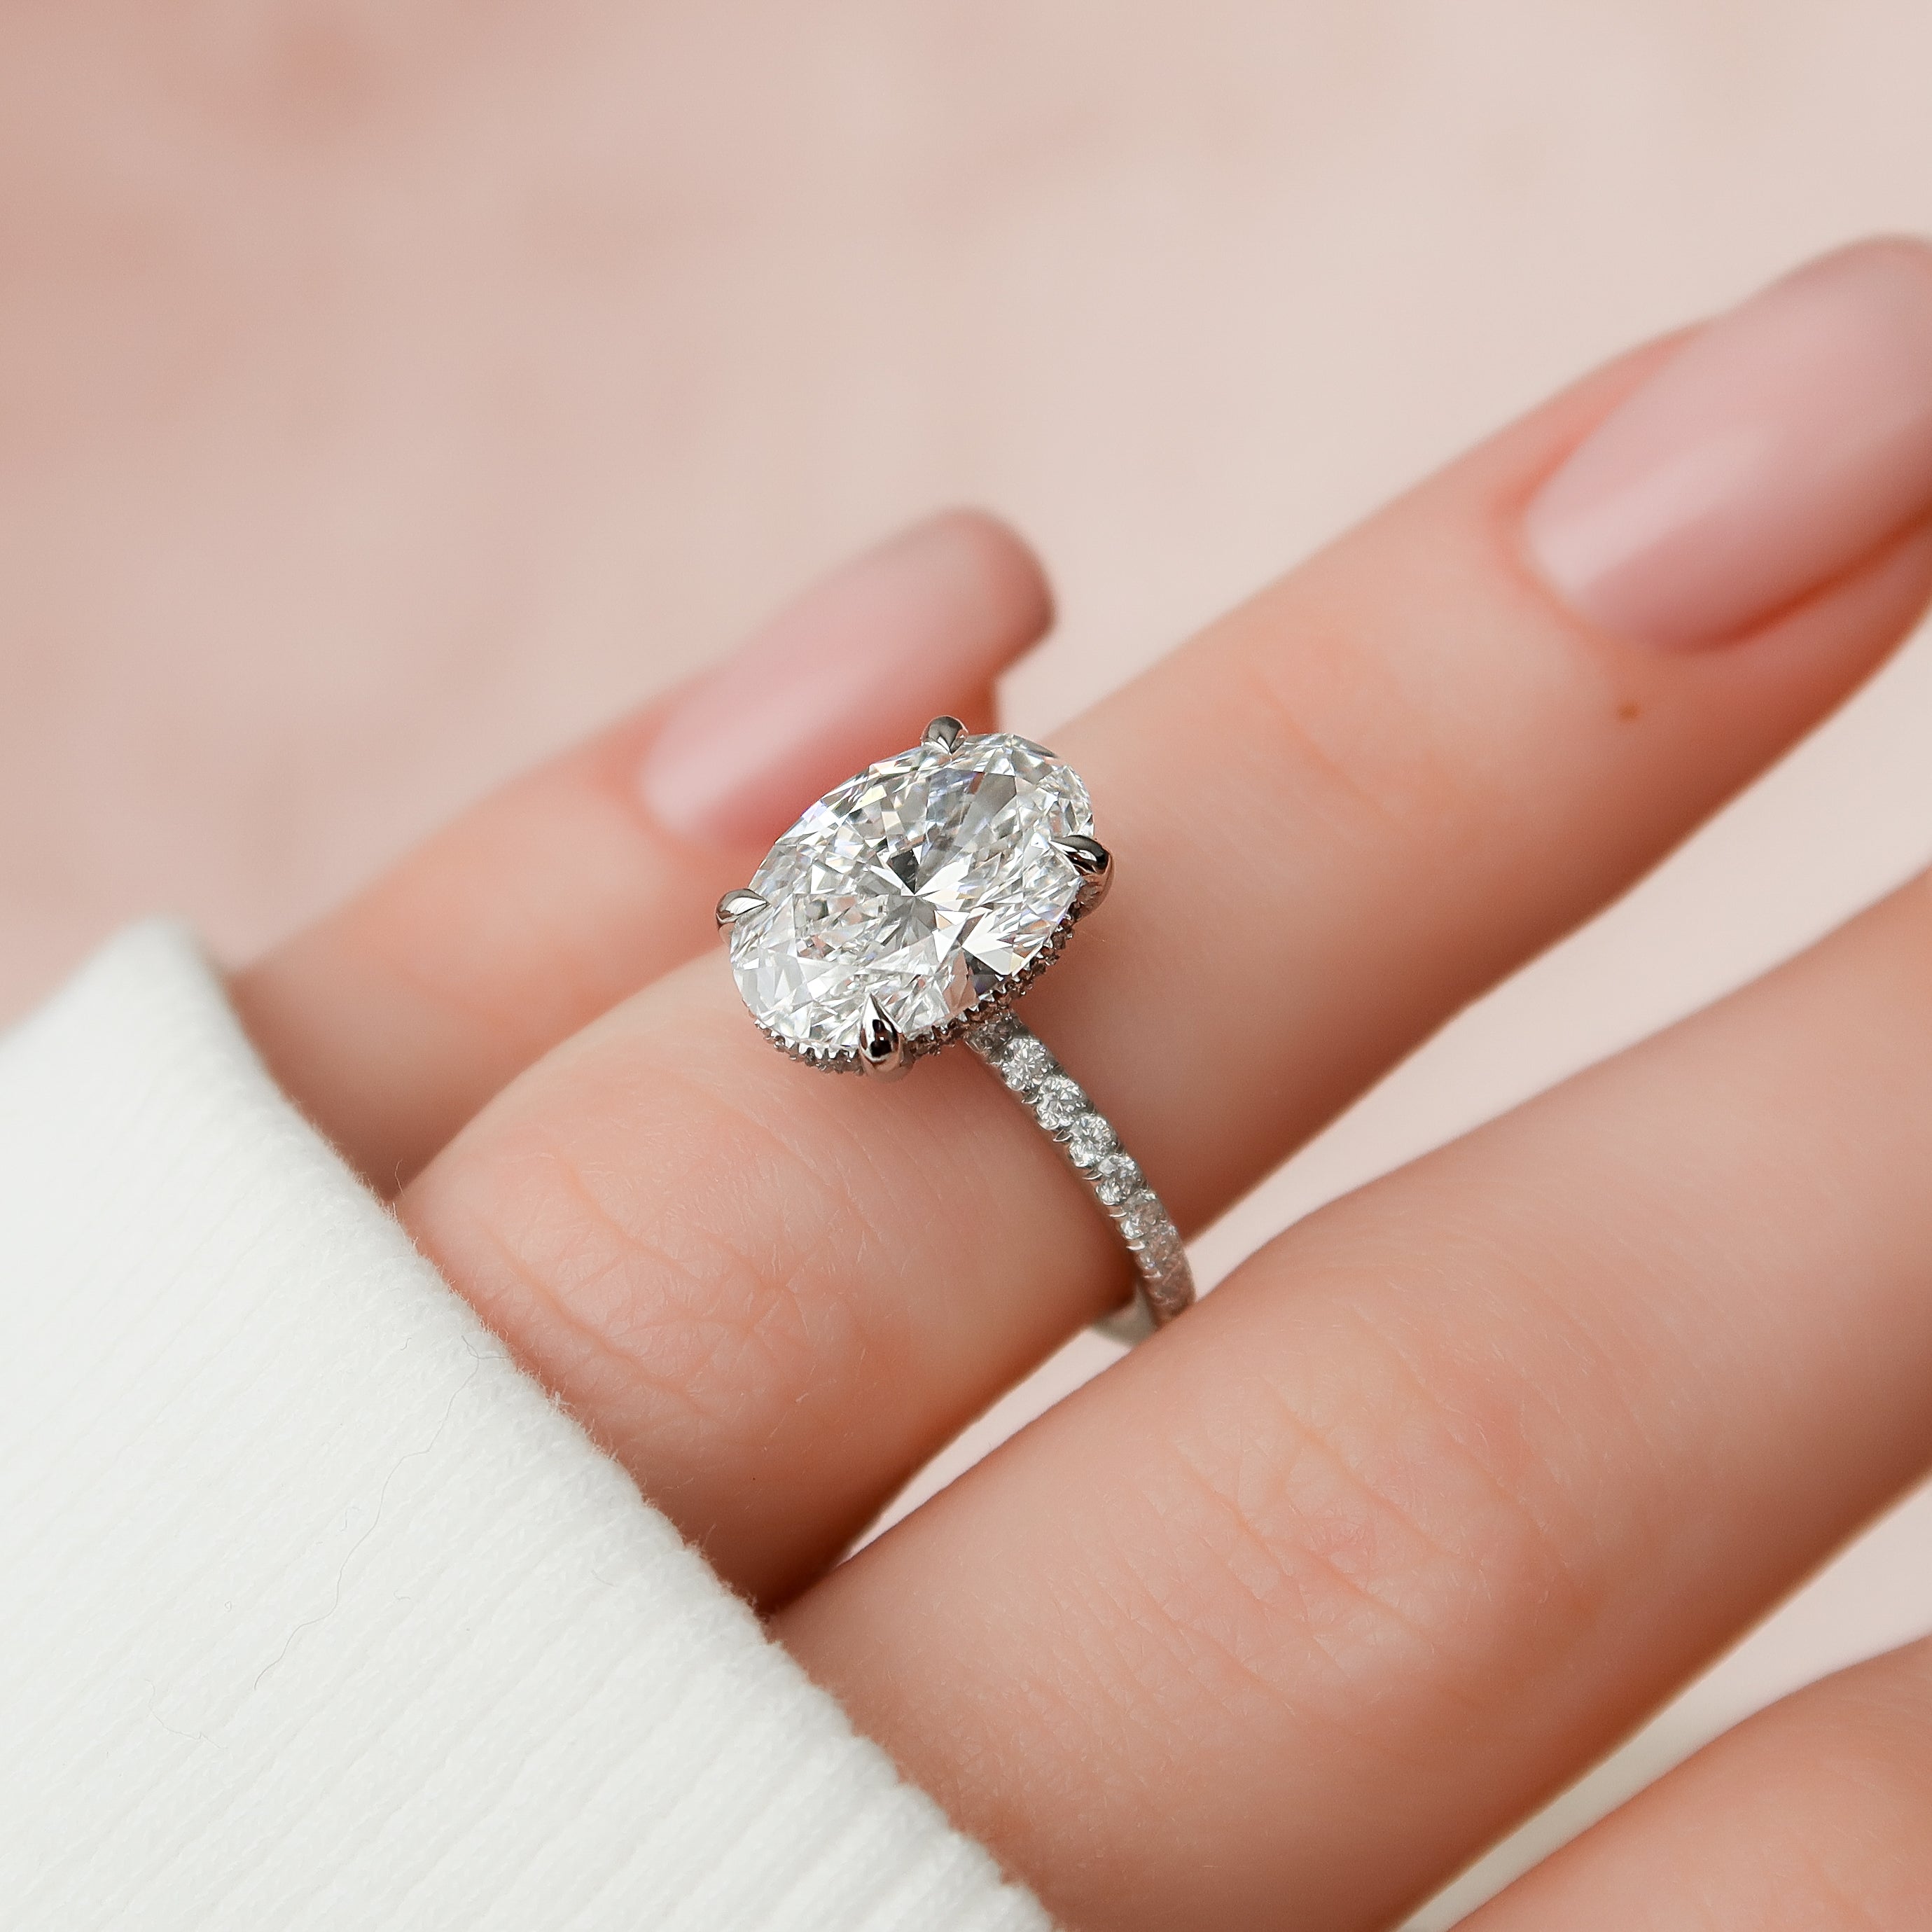 Kwiat | Kwiat Cushion™ Diamond Engagement Ring in a Four Prong Setting in  Platinum - Kwiat